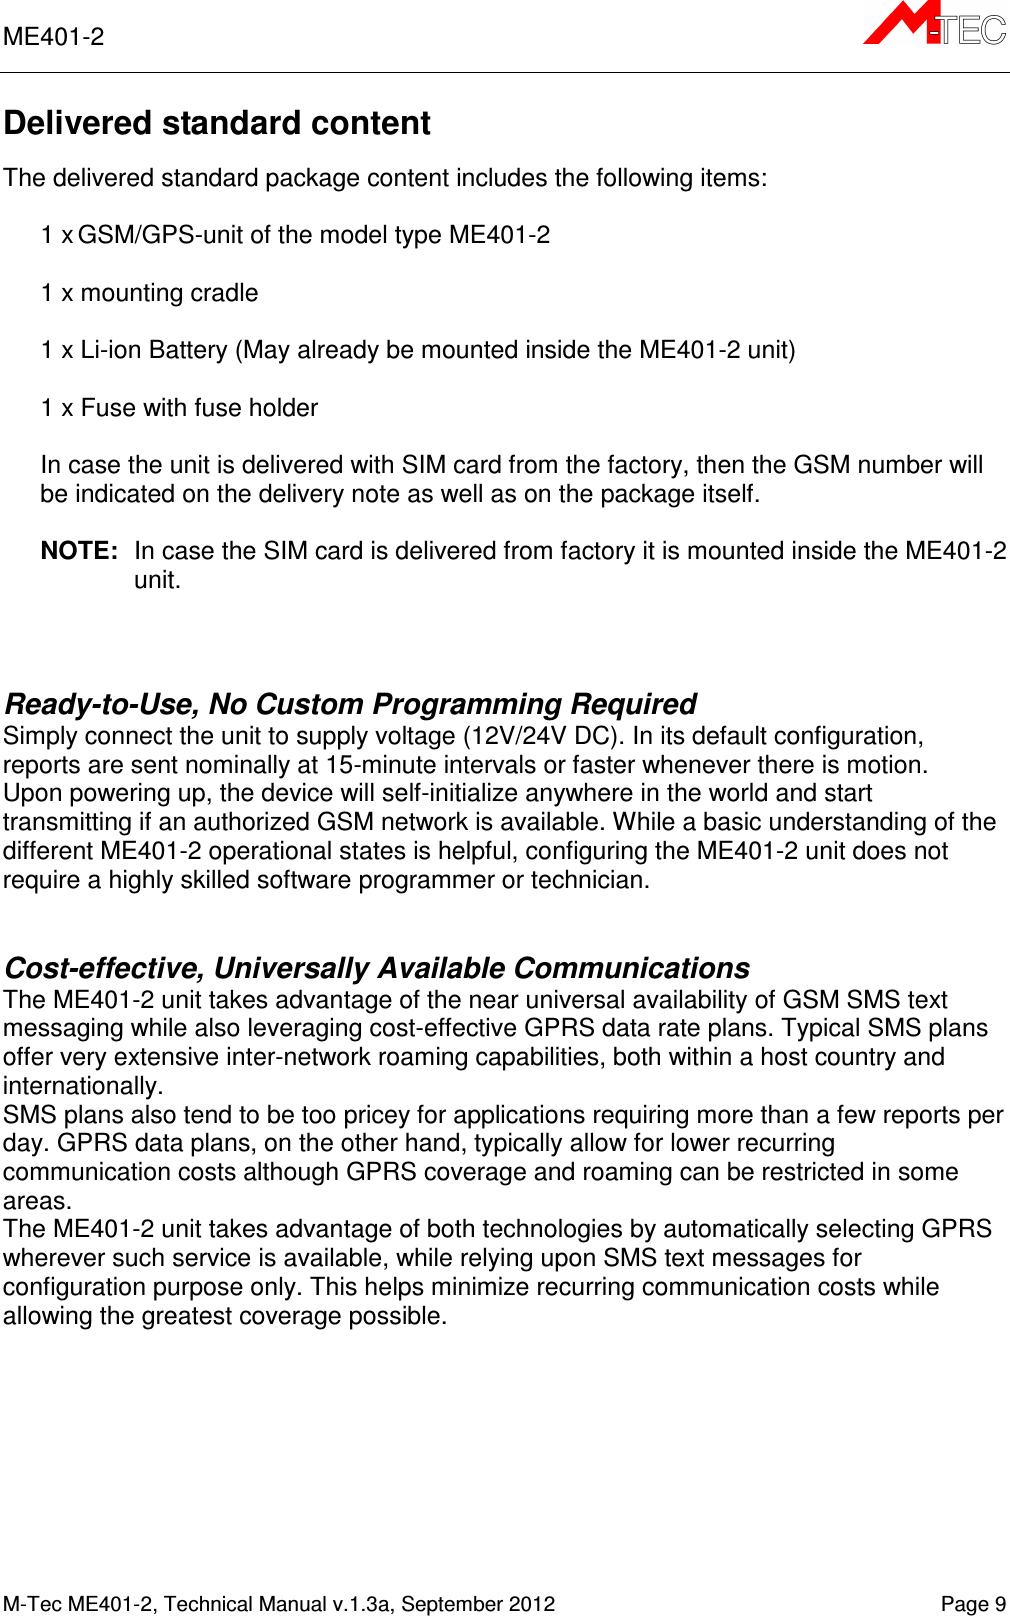 ME401-2       M-Tec ME401-2, Technical Manual v.1.3a, September 2012    Page 9 Delivered standard content  The delivered standard package content includes the following items:  1 x GSM/GPS-unit of the model type ME401-2  1 x mounting cradle  1 x Li-ion Battery (May already be mounted inside the ME401-2 unit)  1 x Fuse with fuse holder  In case the unit is delivered with SIM card from the factory, then the GSM number will be indicated on the delivery note as well as on the package itself.  NOTE:  In case the SIM card is delivered from factory it is mounted inside the ME401-2 unit.   Ready-to-Use, No Custom Programming Required Simply connect the unit to supply voltage (12V/24V DC). In its default configuration, reports are sent nominally at 15-minute intervals or faster whenever there is motion.  Upon powering up, the device will self-initialize anywhere in the world and start transmitting if an authorized GSM network is available. While a basic understanding of the different ME401-2 operational states is helpful, configuring the ME401-2 unit does not require a highly skilled software programmer or technician.   Cost-effective, Universally Available Communications The ME401-2 unit takes advantage of the near universal availability of GSM SMS text messaging while also leveraging cost-effective GPRS data rate plans. Typical SMS plans offer very extensive inter-network roaming capabilities, both within a host country and internationally.  SMS plans also tend to be too pricey for applications requiring more than a few reports per day. GPRS data plans, on the other hand, typically allow for lower recurring communication costs although GPRS coverage and roaming can be restricted in some areas.  The ME401-2 unit takes advantage of both technologies by automatically selecting GPRS wherever such service is available, while relying upon SMS text messages for configuration purpose only. This helps minimize recurring communication costs while allowing the greatest coverage possible.